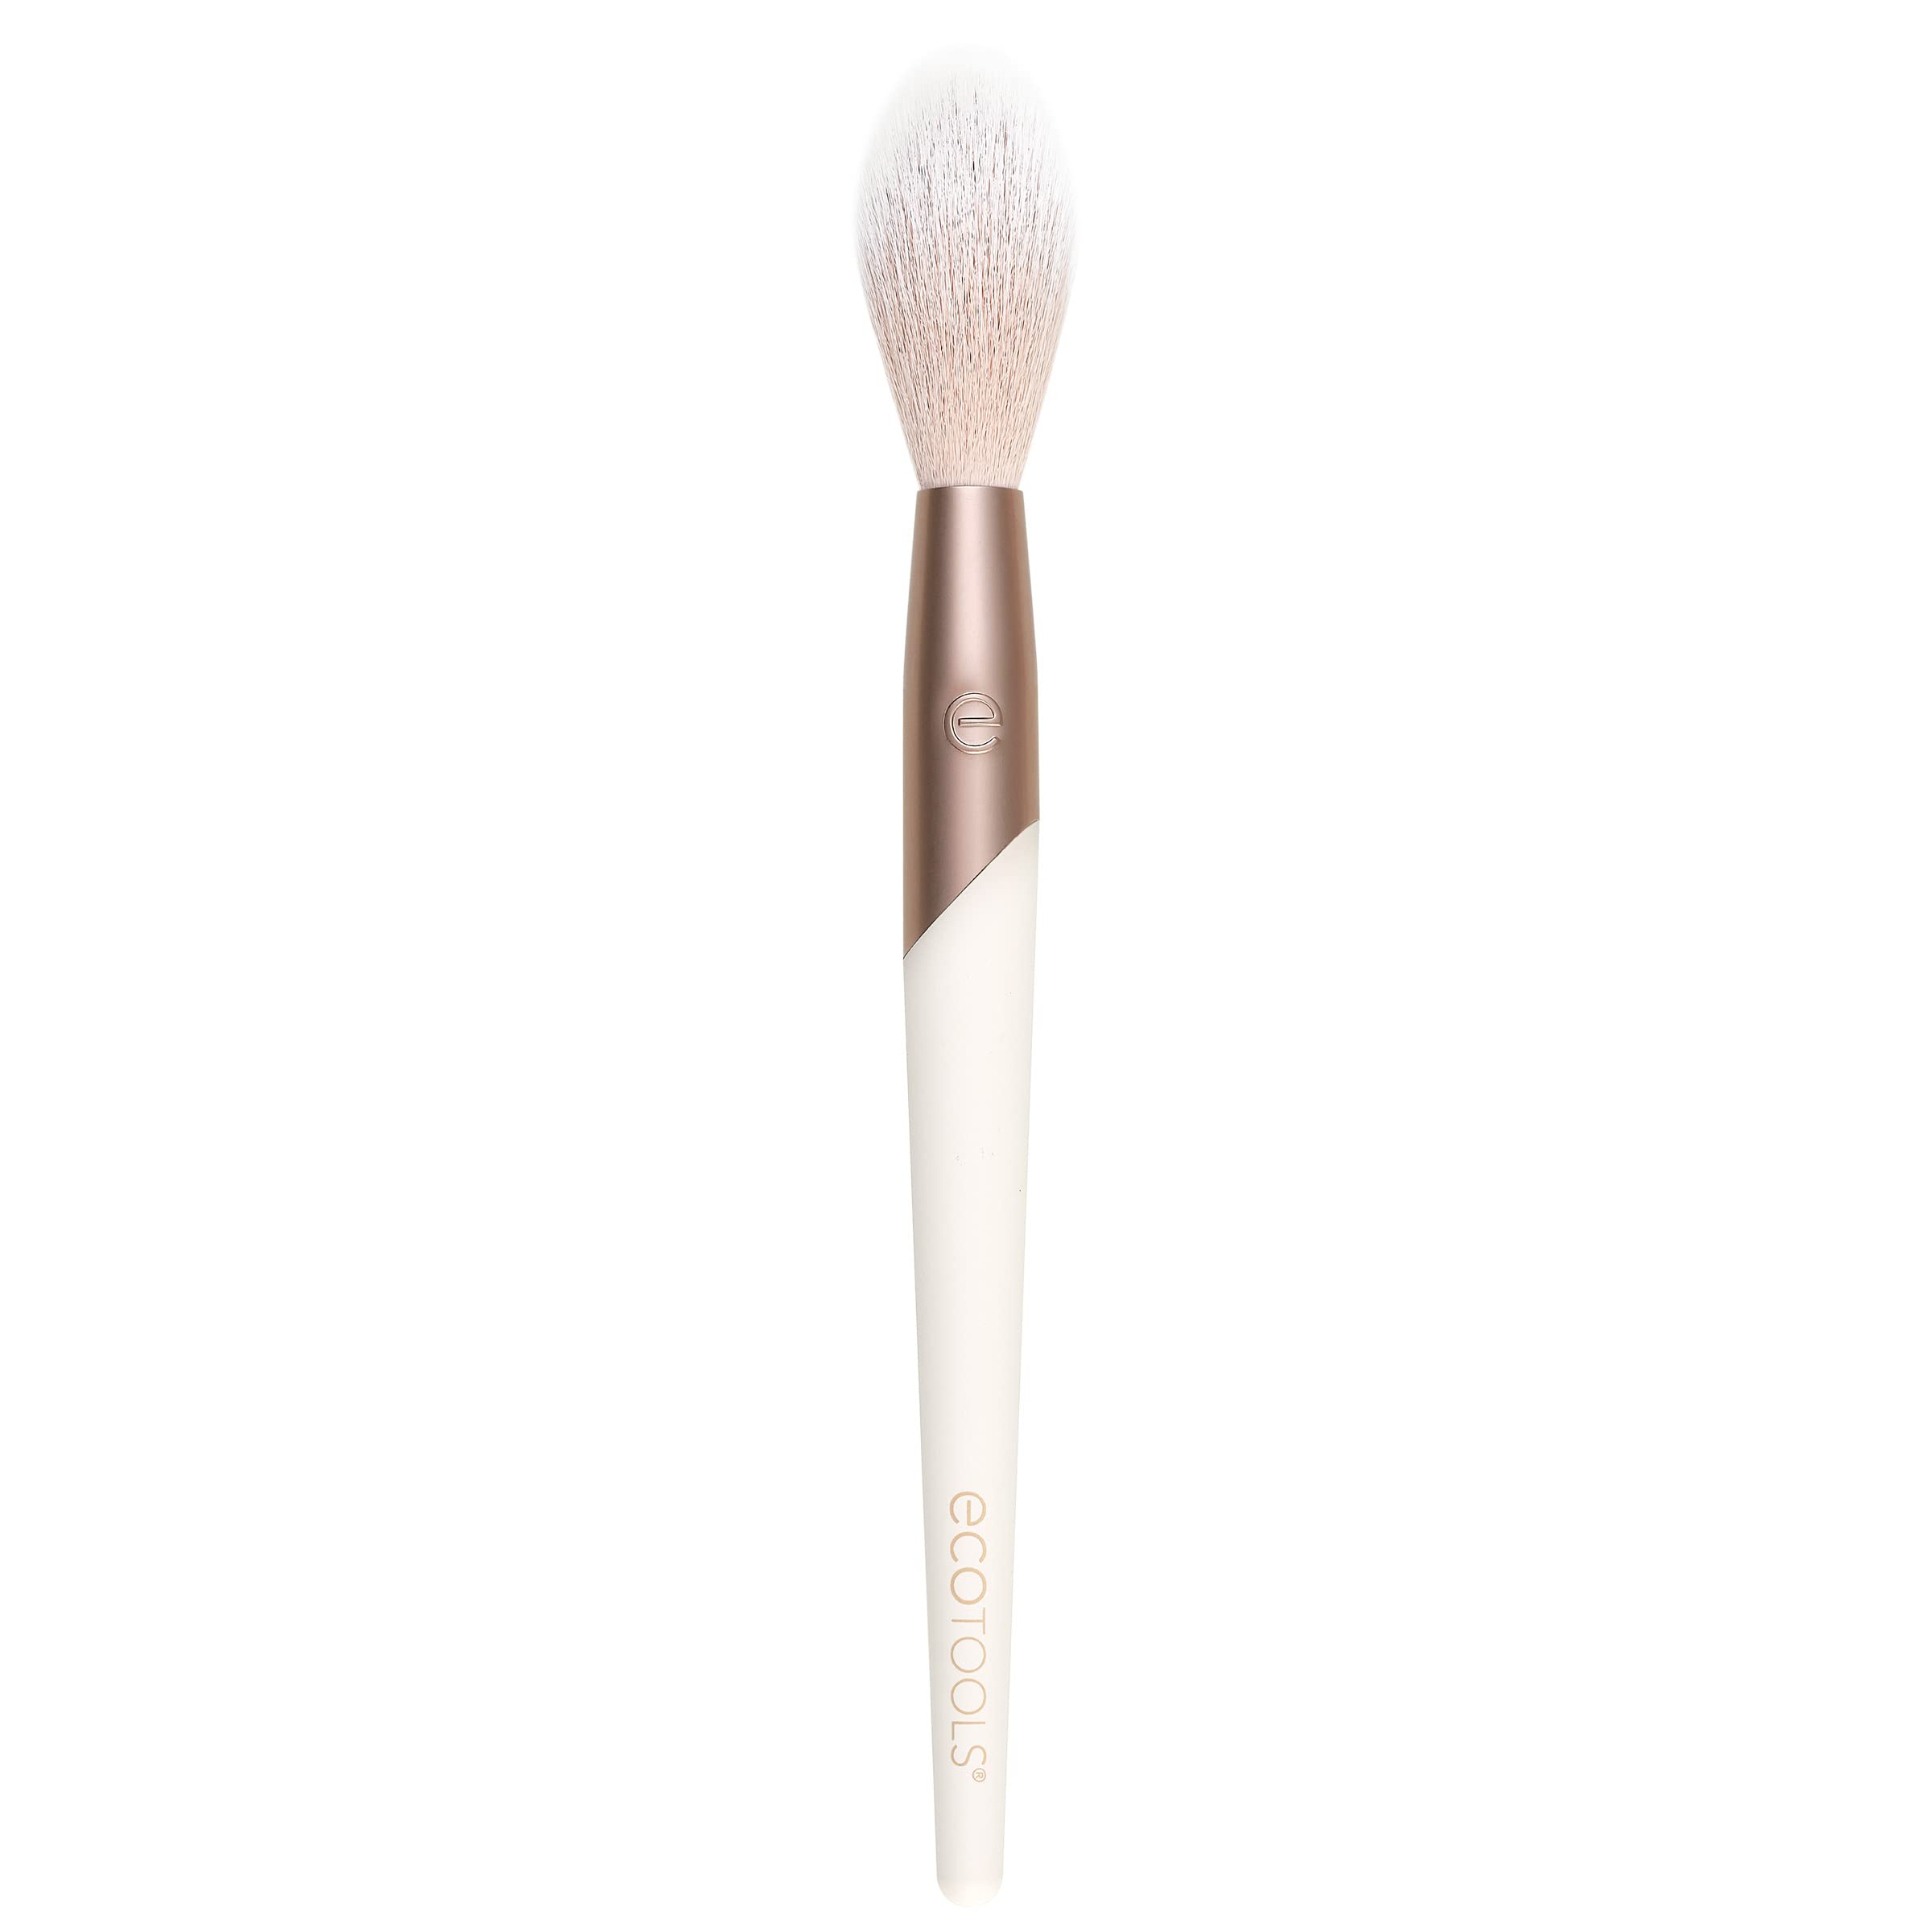 EcoTools Luxe Soft Highlighter Makeup Face Powder Brush, Sheer, Luminous Glow, Premium Quality Makeup Brush, Ultra Soft, Synthetic Bristles, Eco Friendly Face Brush, Cruelty-Free, 1 Count